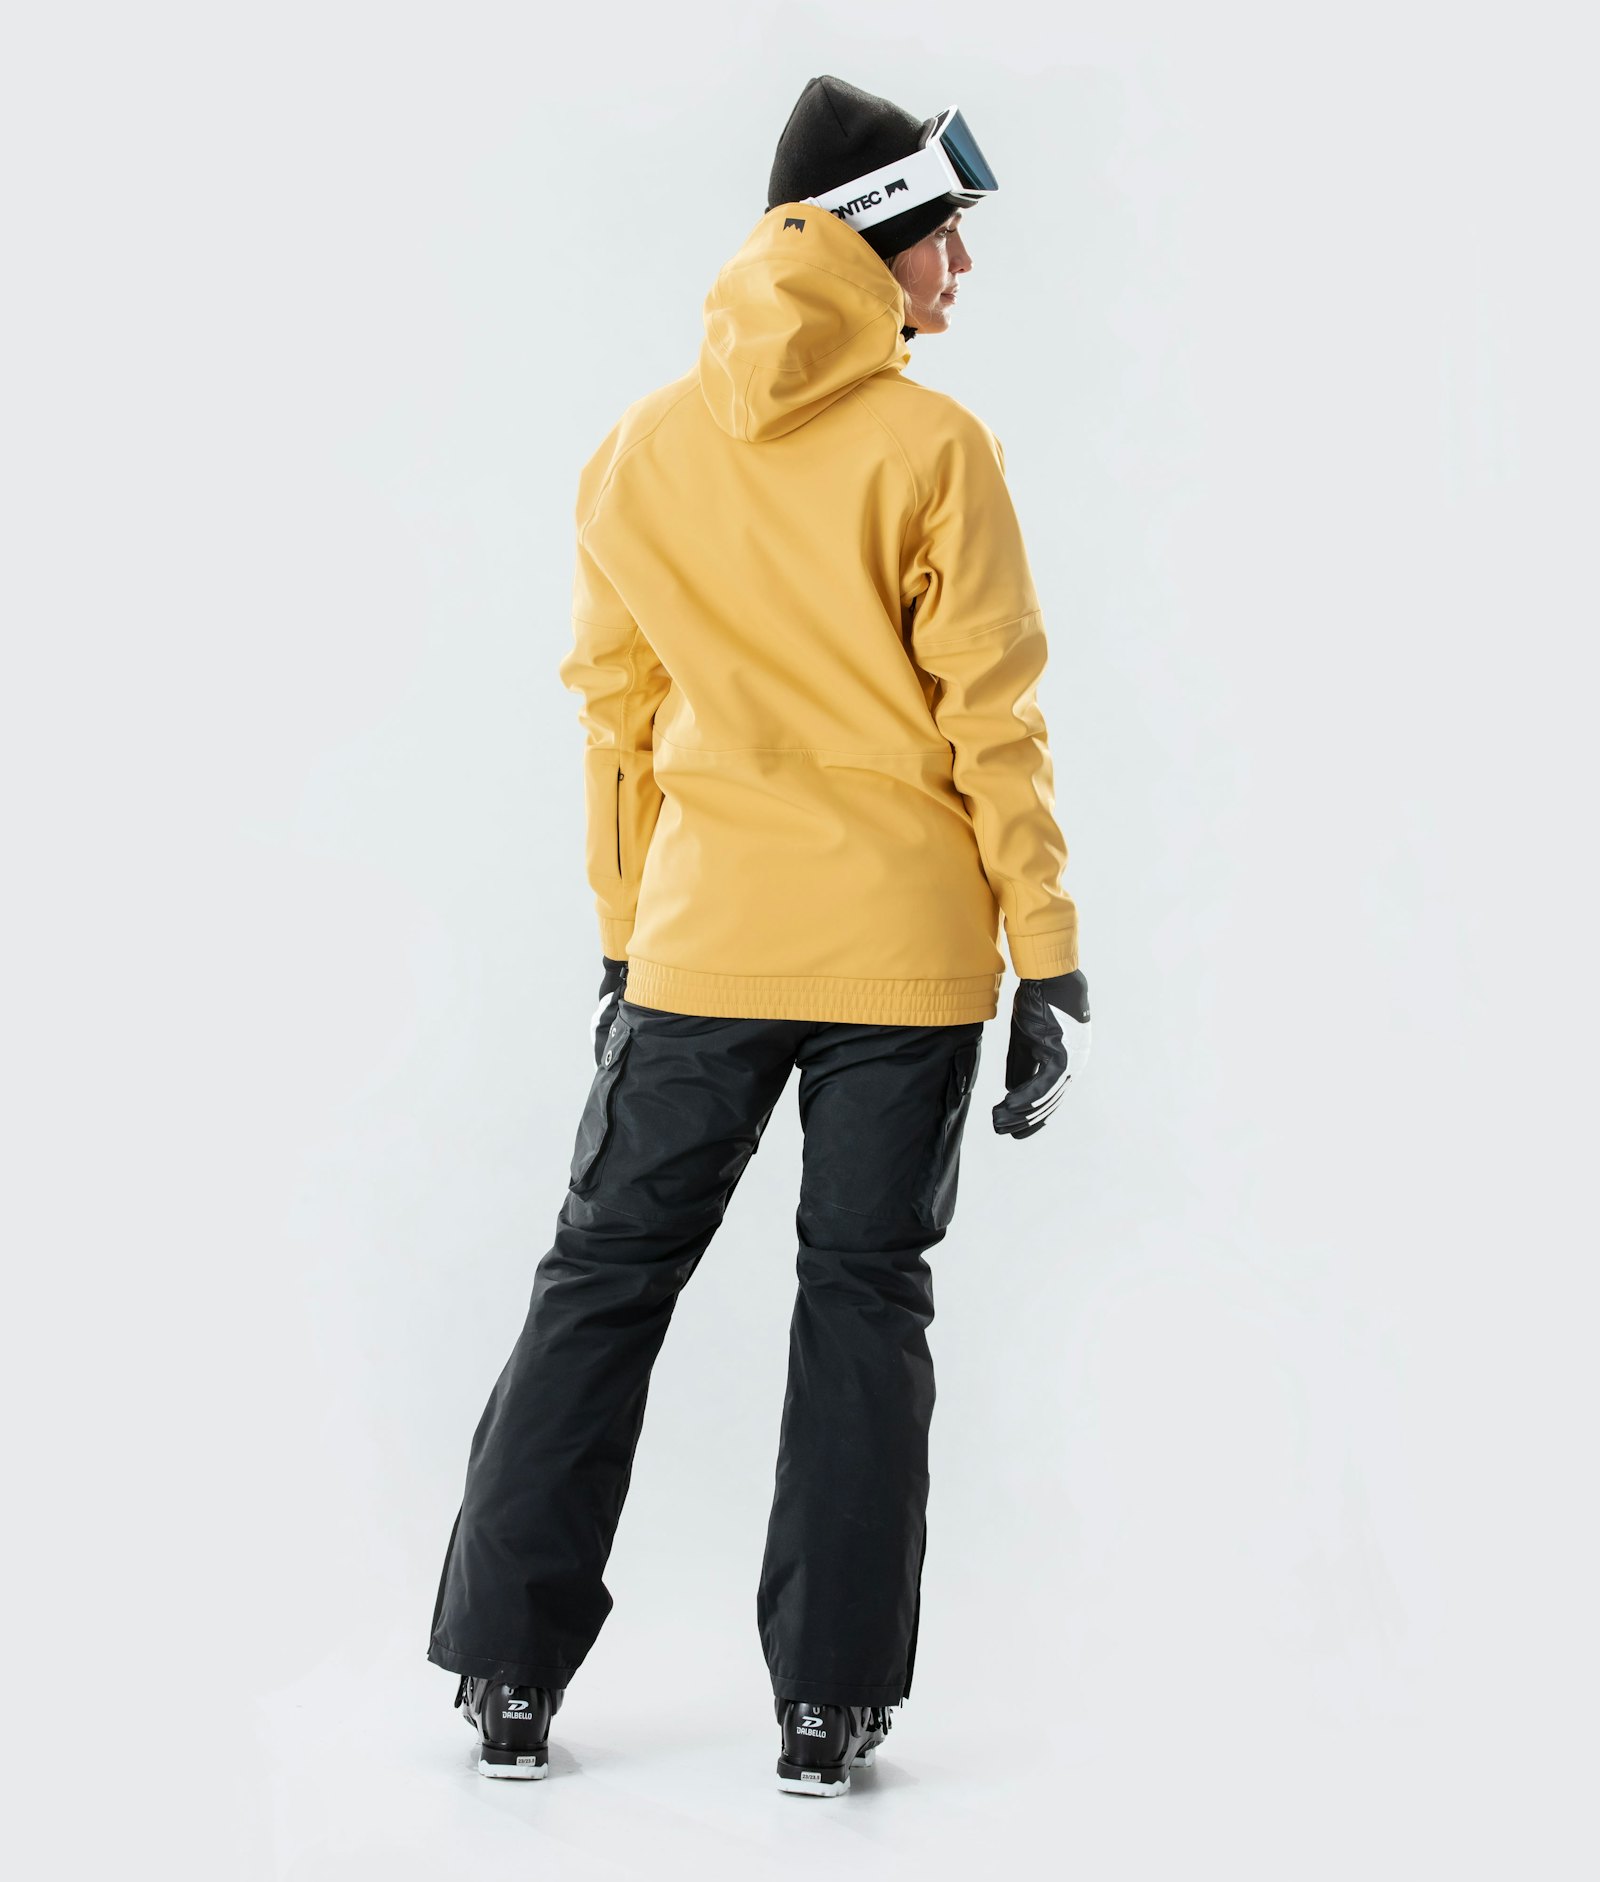 Montec Tempest W 2020 Giacca Sci Donna Yellow